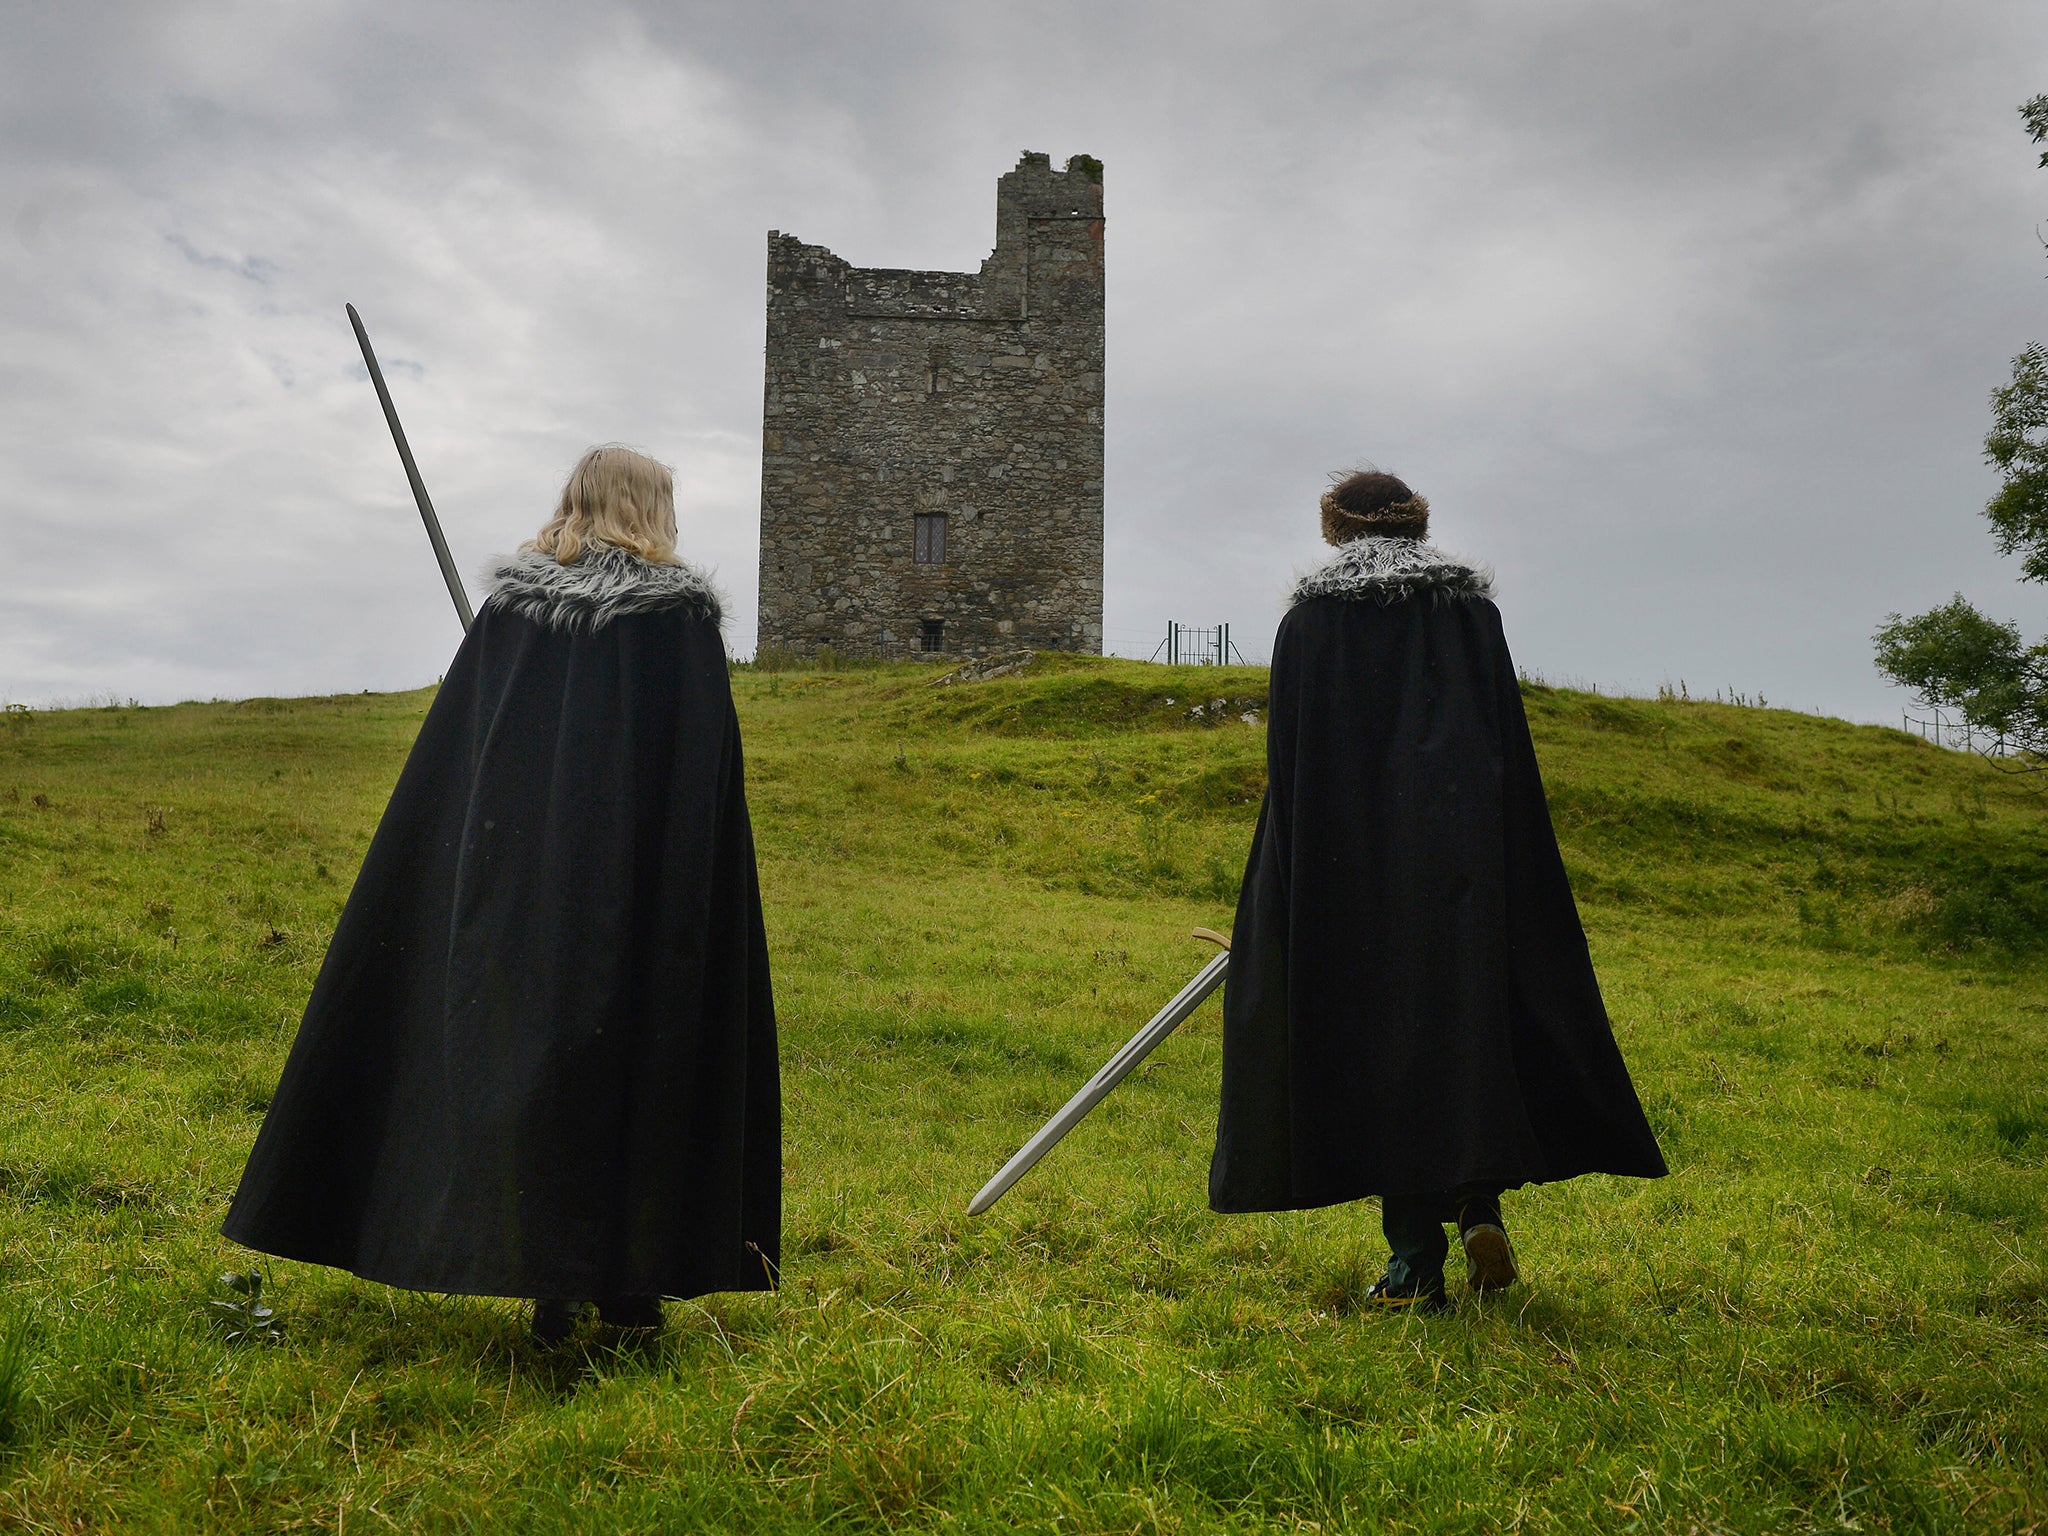 Royal followers: fans tread in the footsteps of King Robert towards Audley’s Castle by Strangford Lough (Getty)